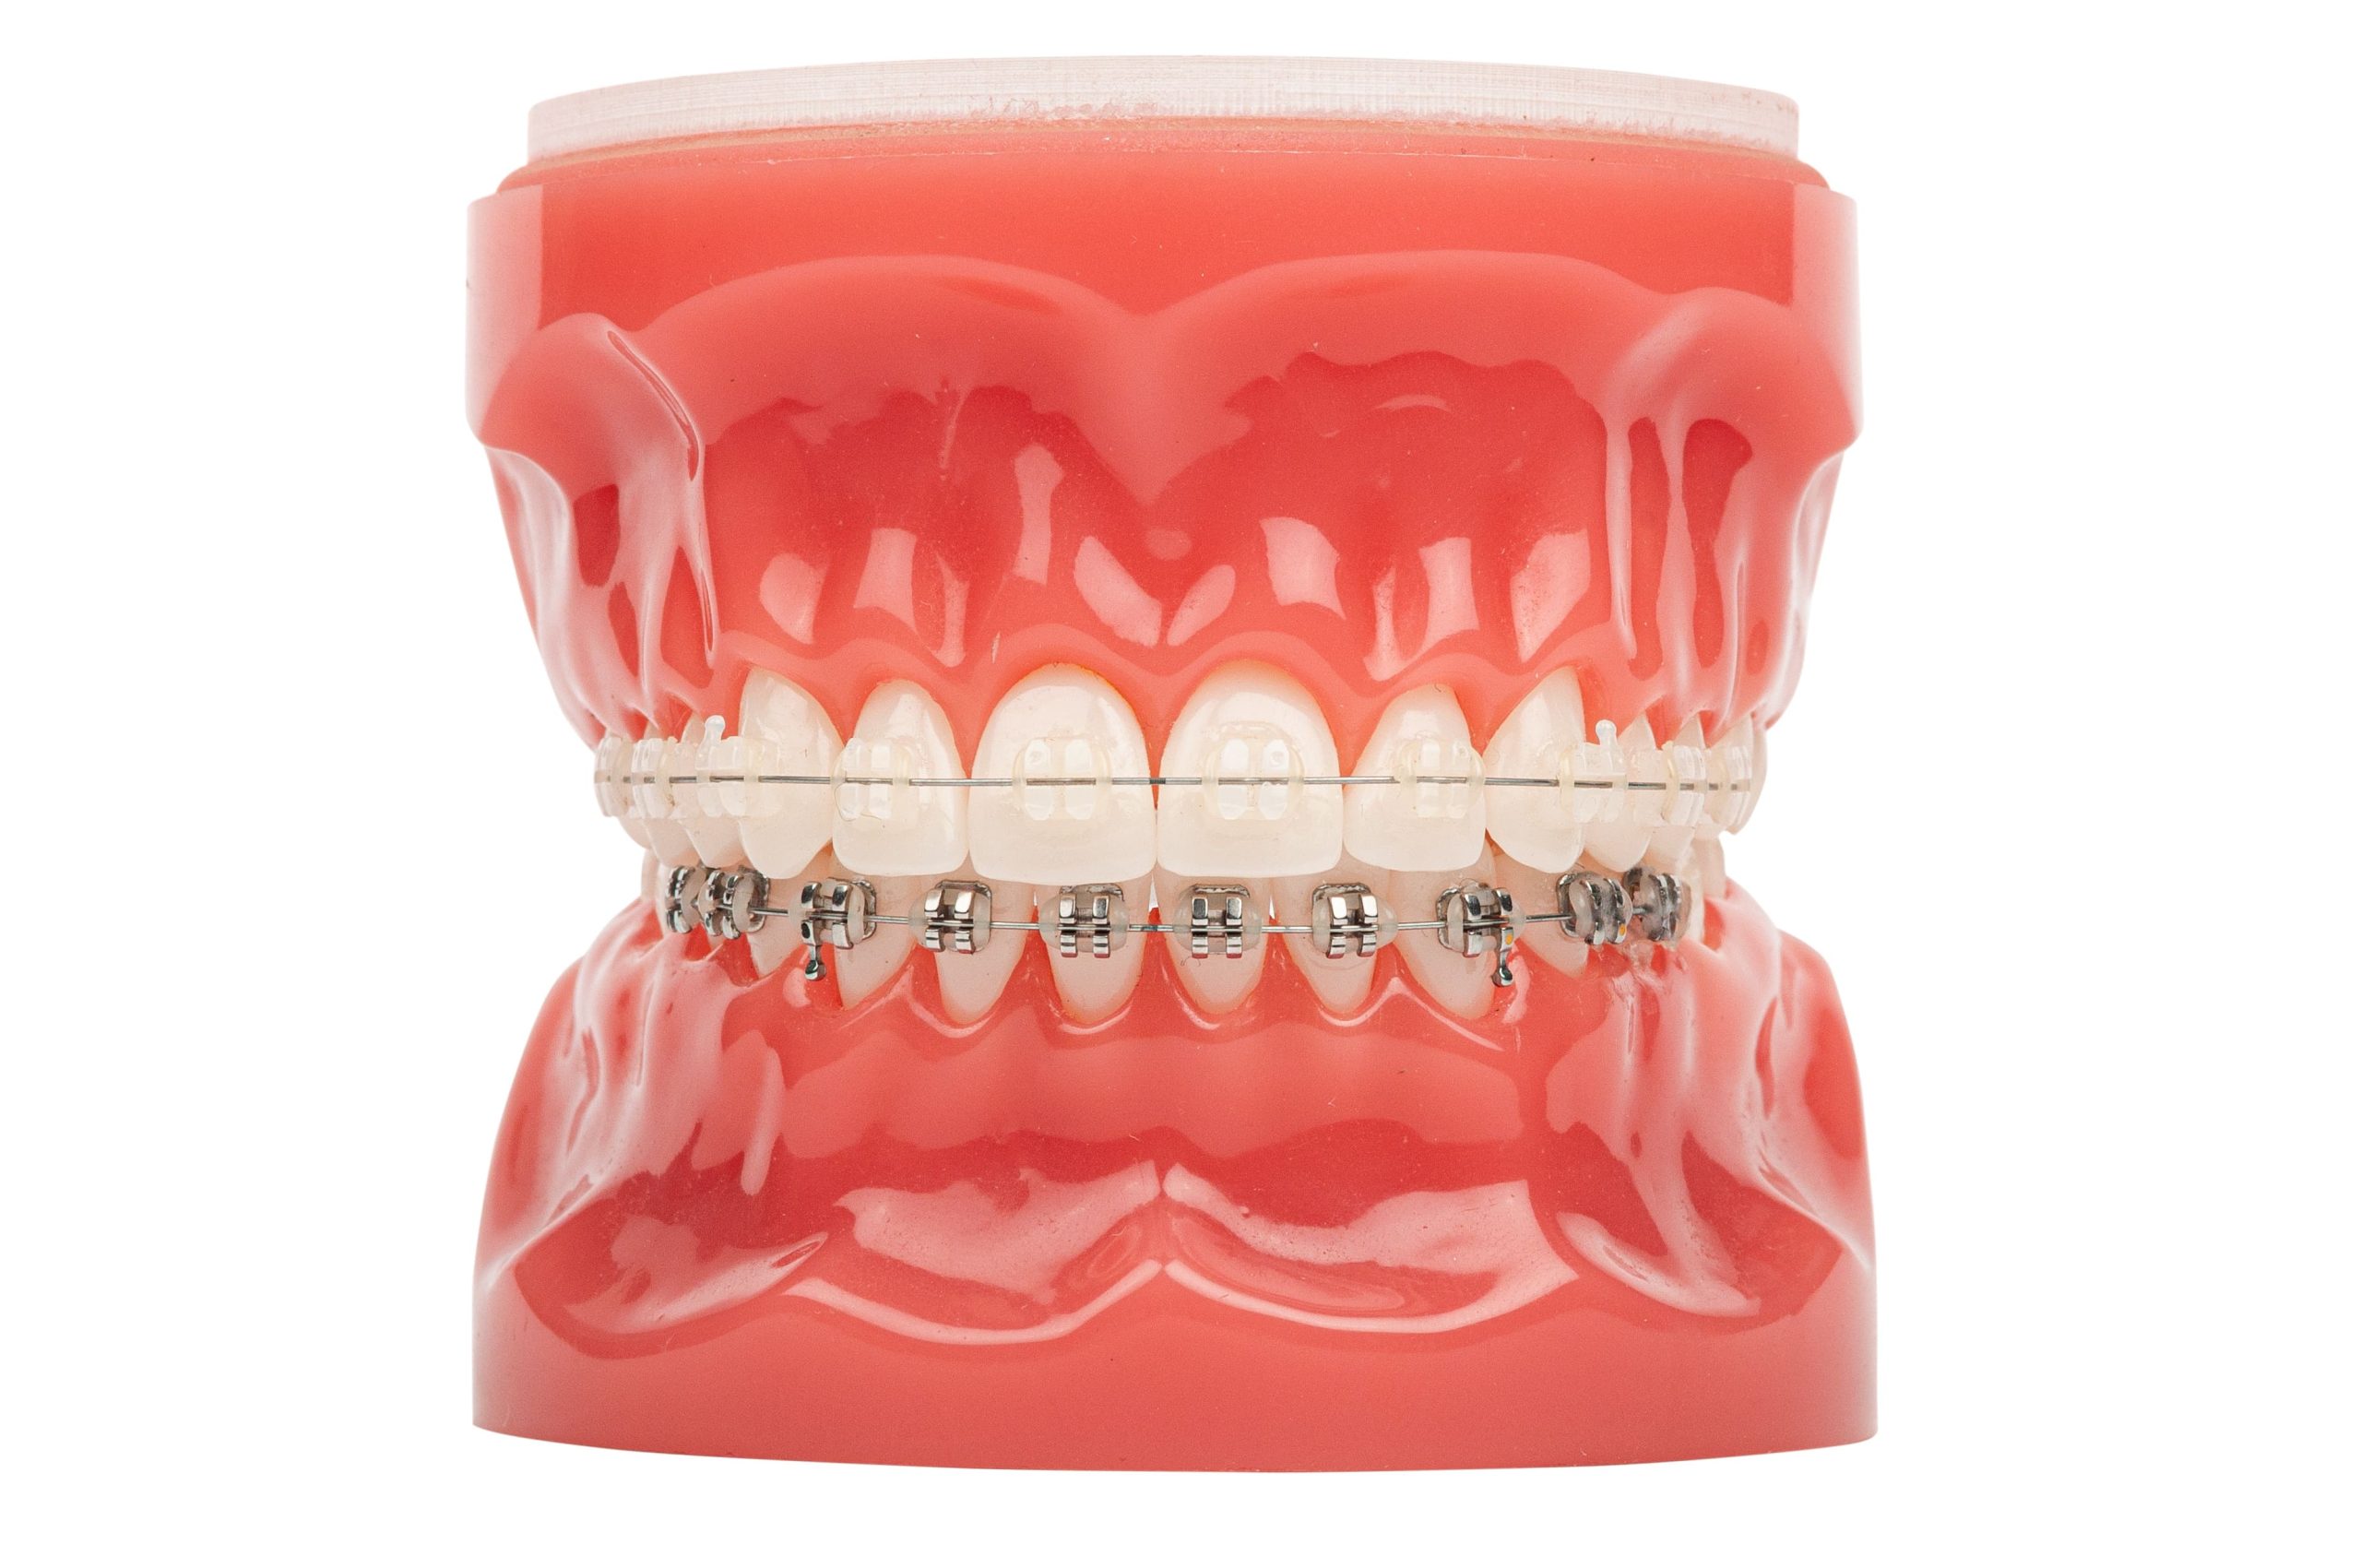 Compare Ceramic Braces and Clear Aligners: Which One is Right for